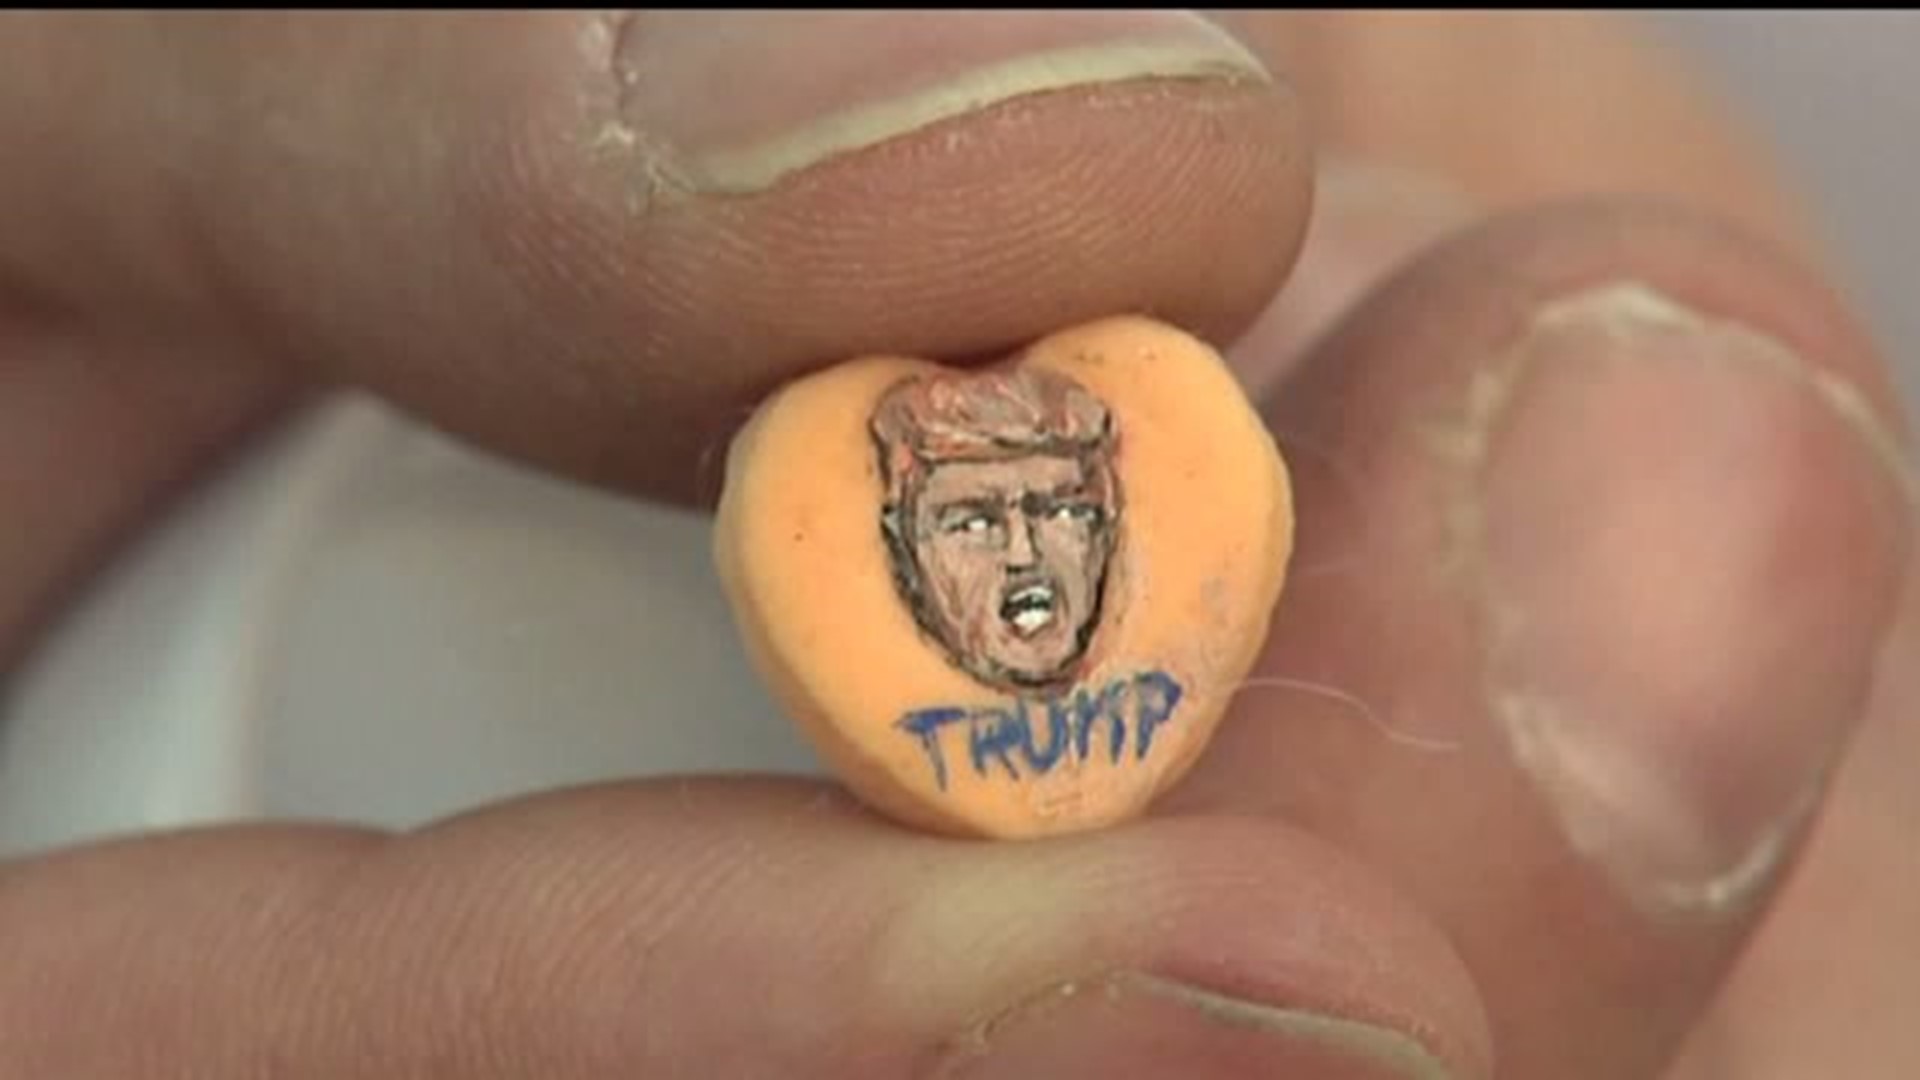 Artist inspired by Donald Trump